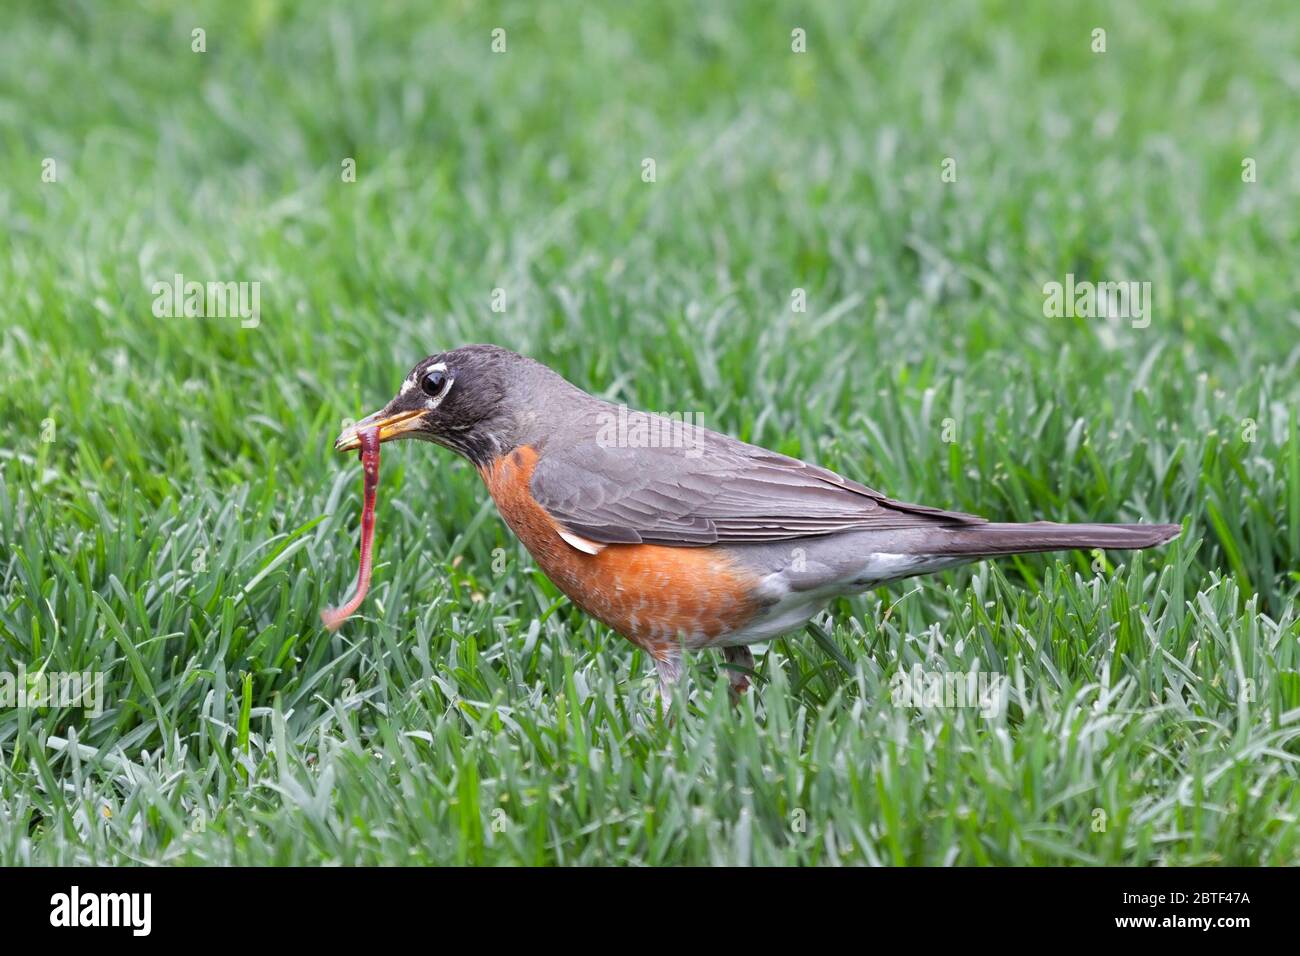 A robin catches and holds a wiggling earthworm in its beak. Stock Photo